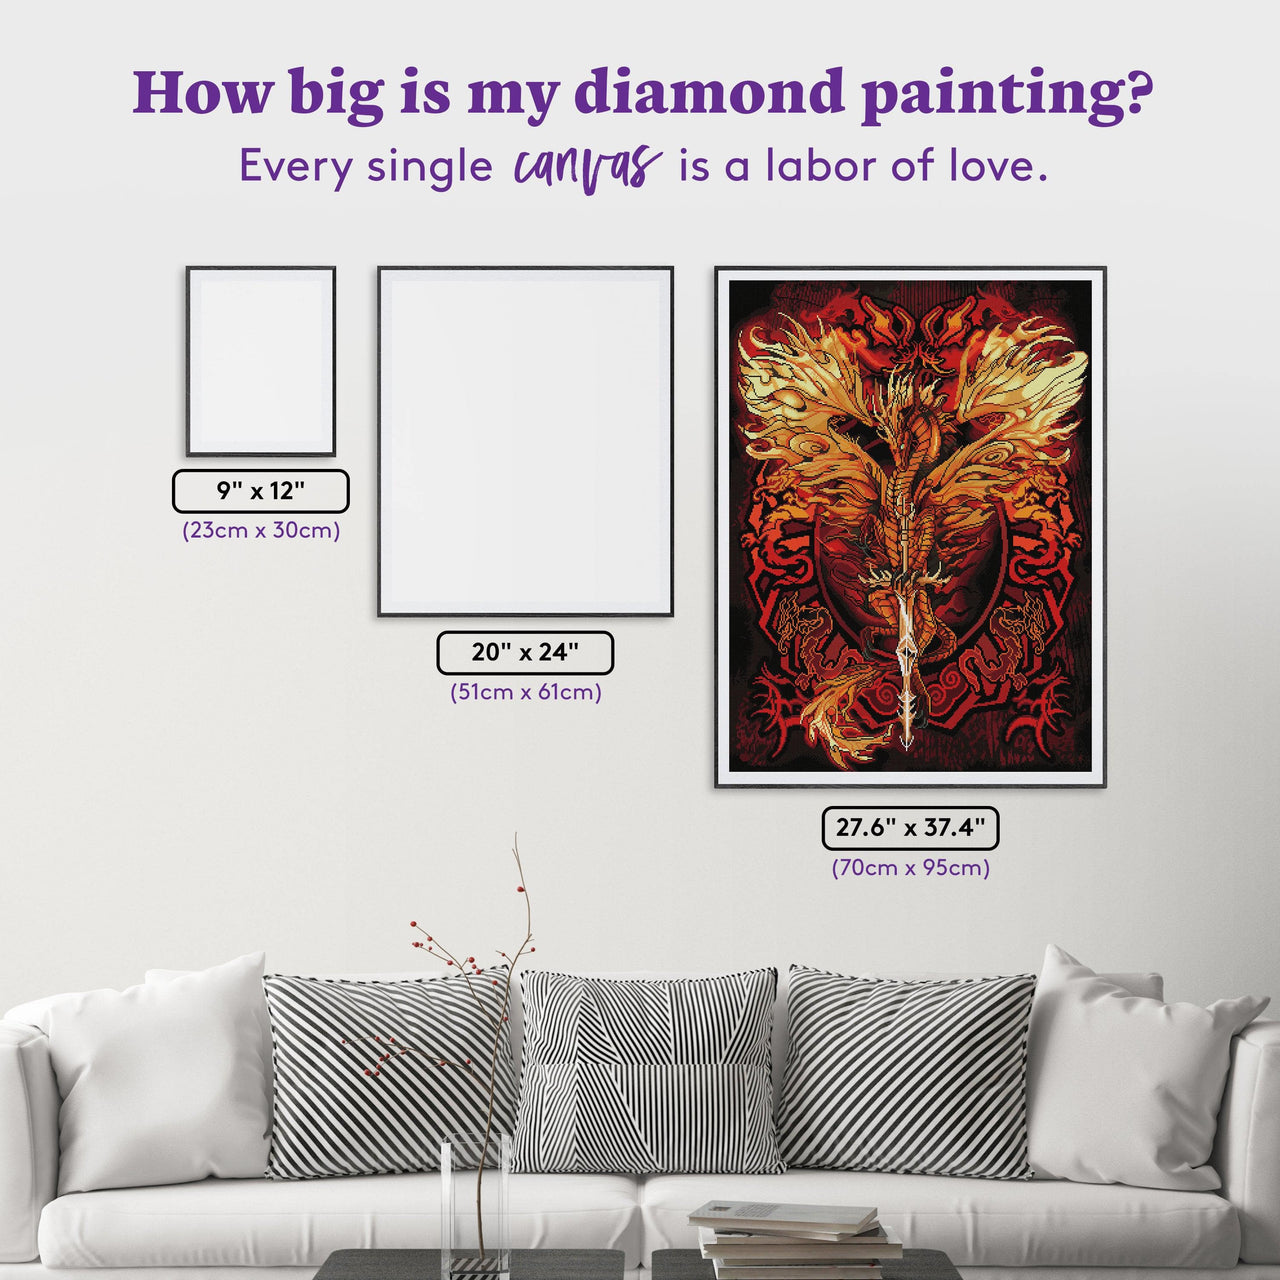 Diamond Painting Flameblade Dragon 27.6" x 37.4" (70cm x 95cm) / Square with 31 Colors including 5 ABs / 107,061